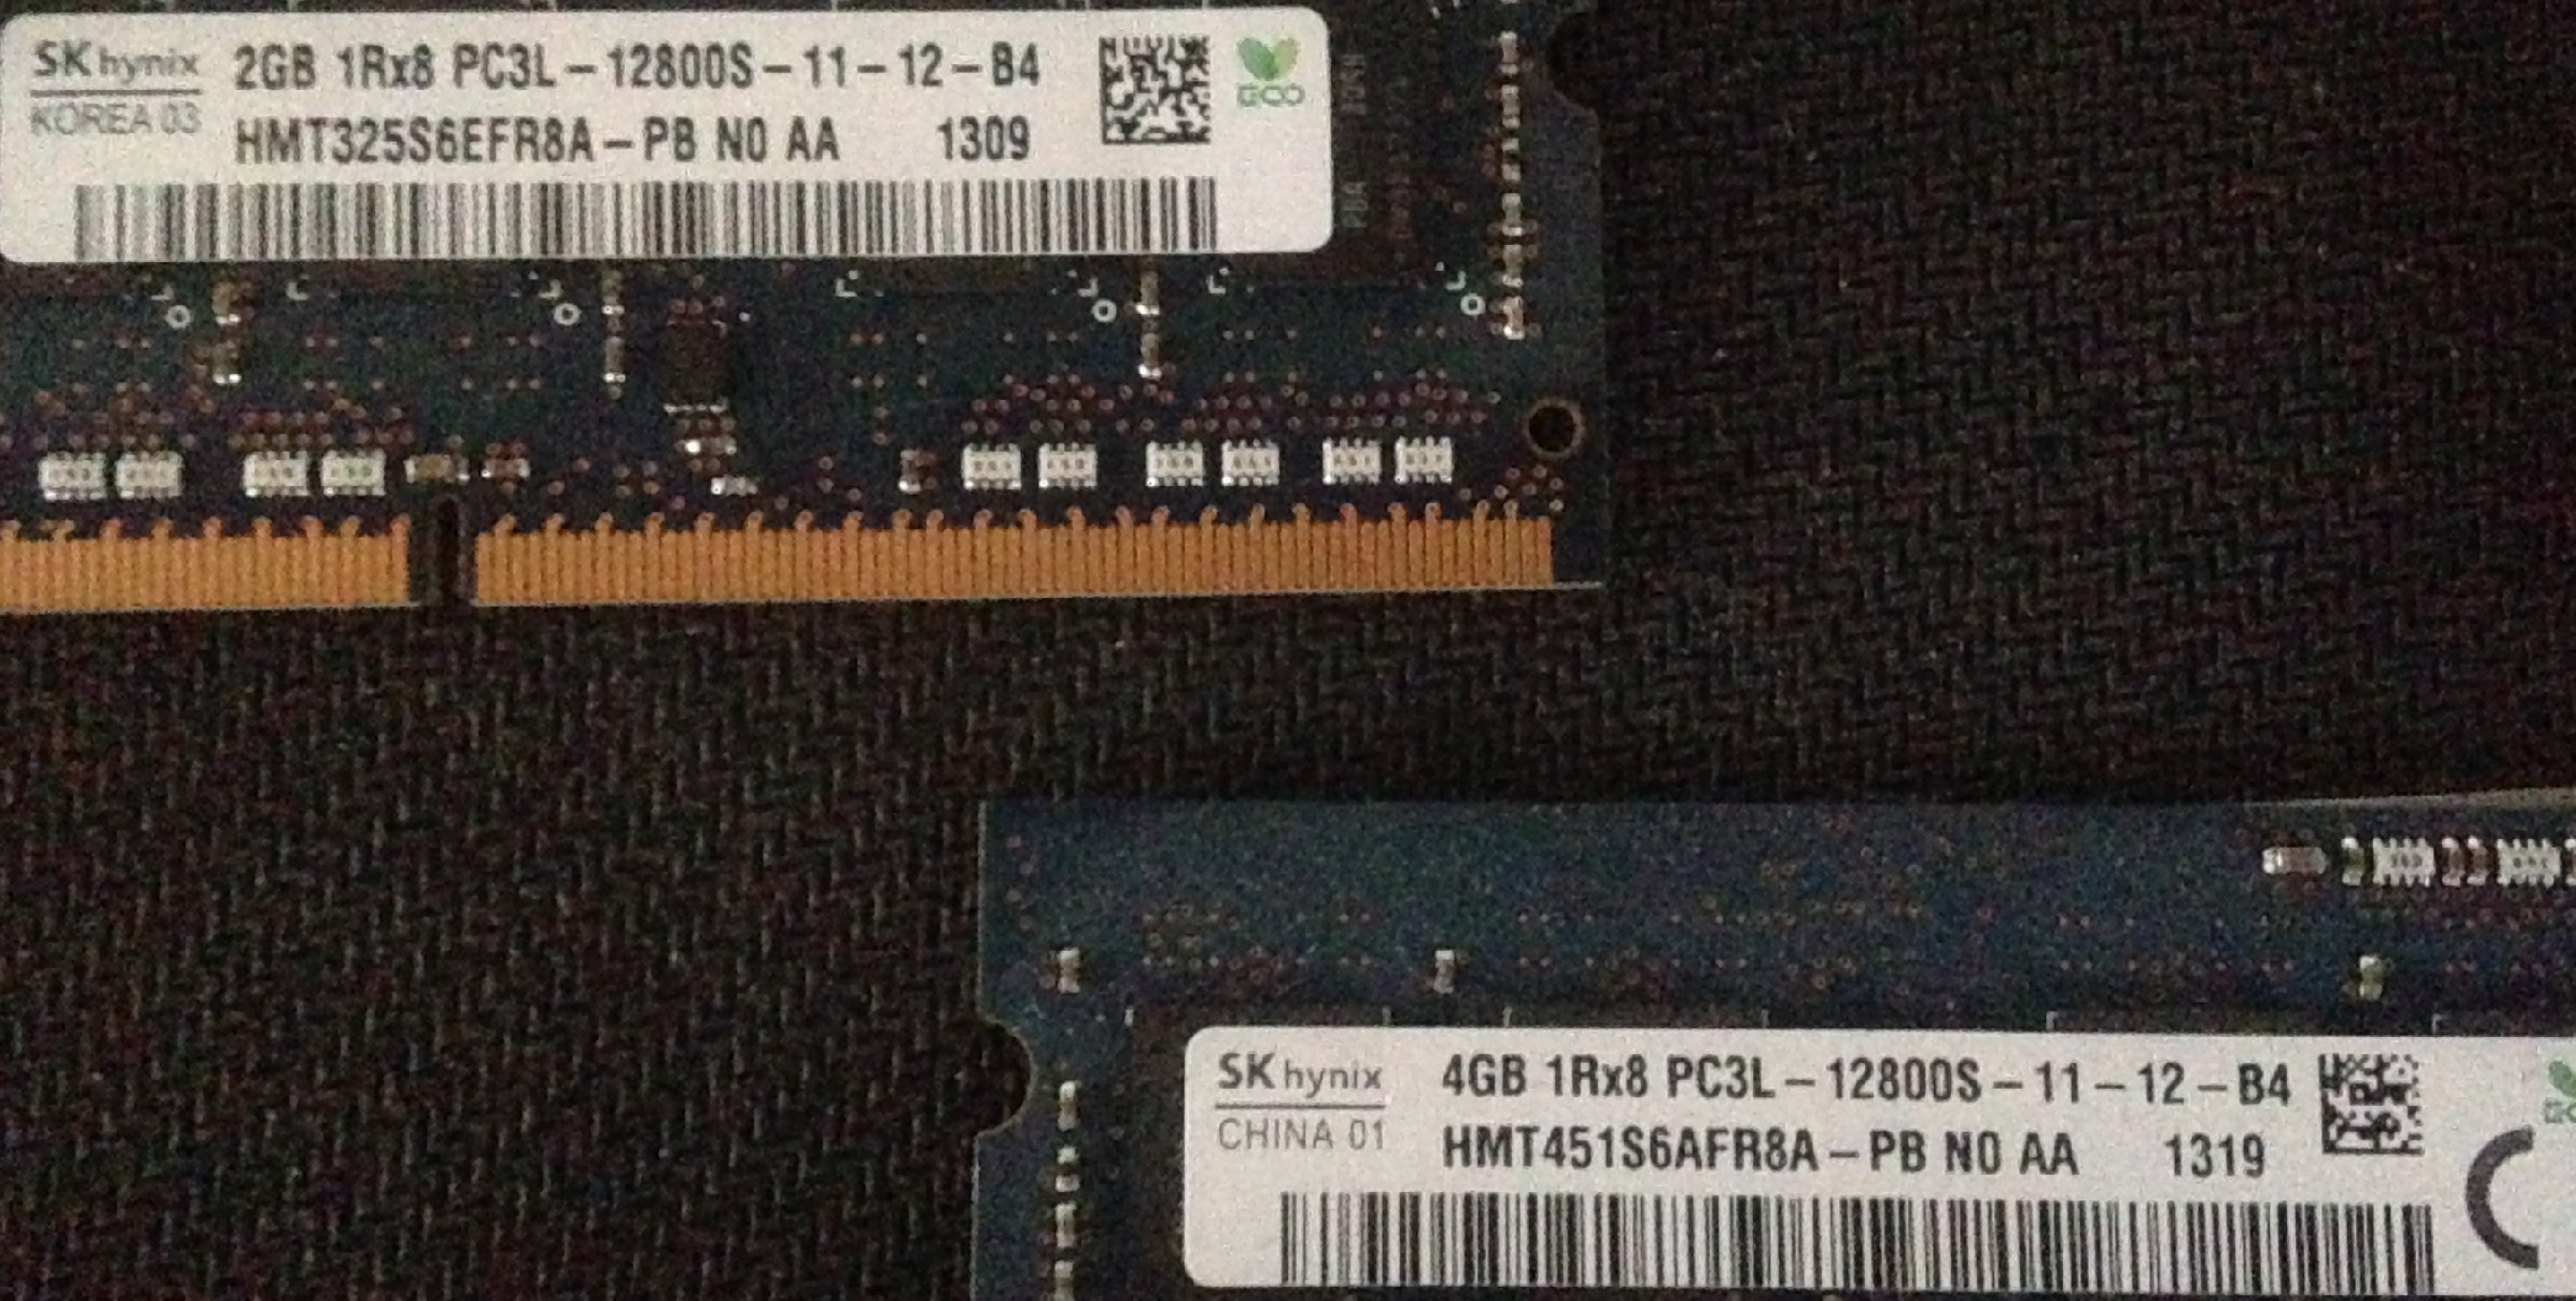 graphic card on hp pavilion 15? - HP Support Community 6063680